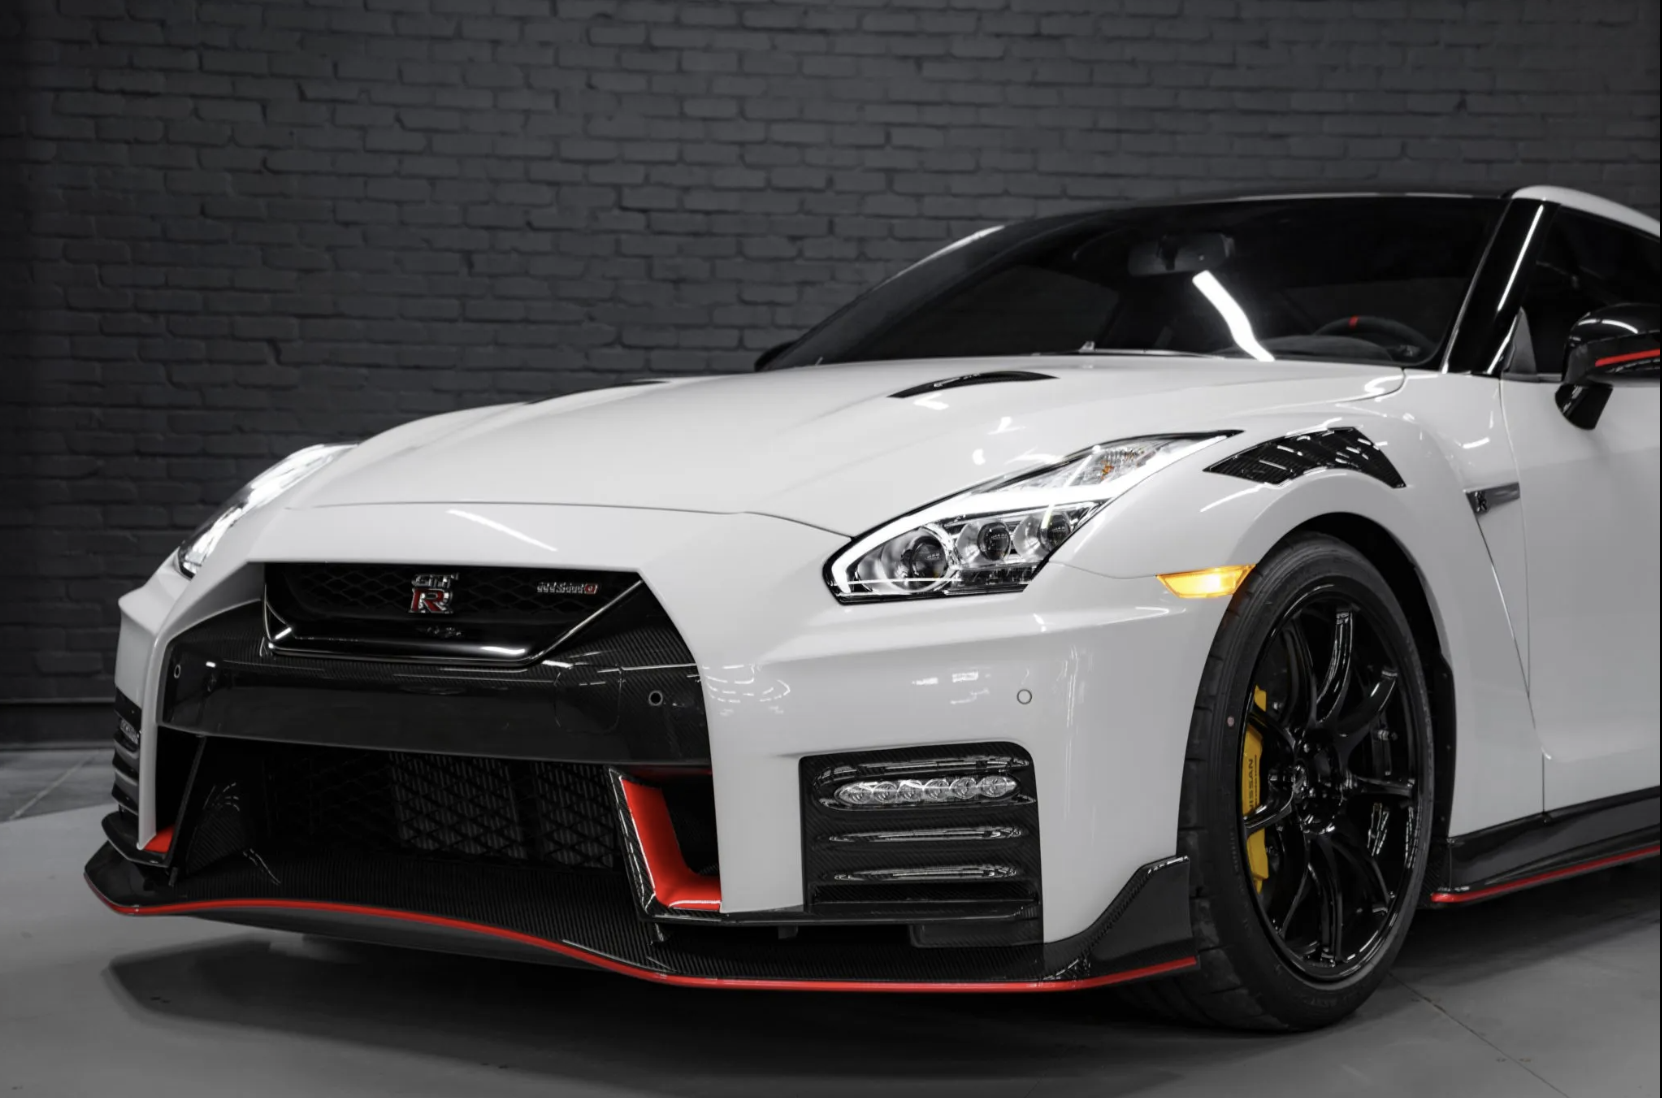 General 1662x1098 Nissan Nissan GT-R Nissan GT-R NISMO car frontal view headlights reflection vehicle white cars